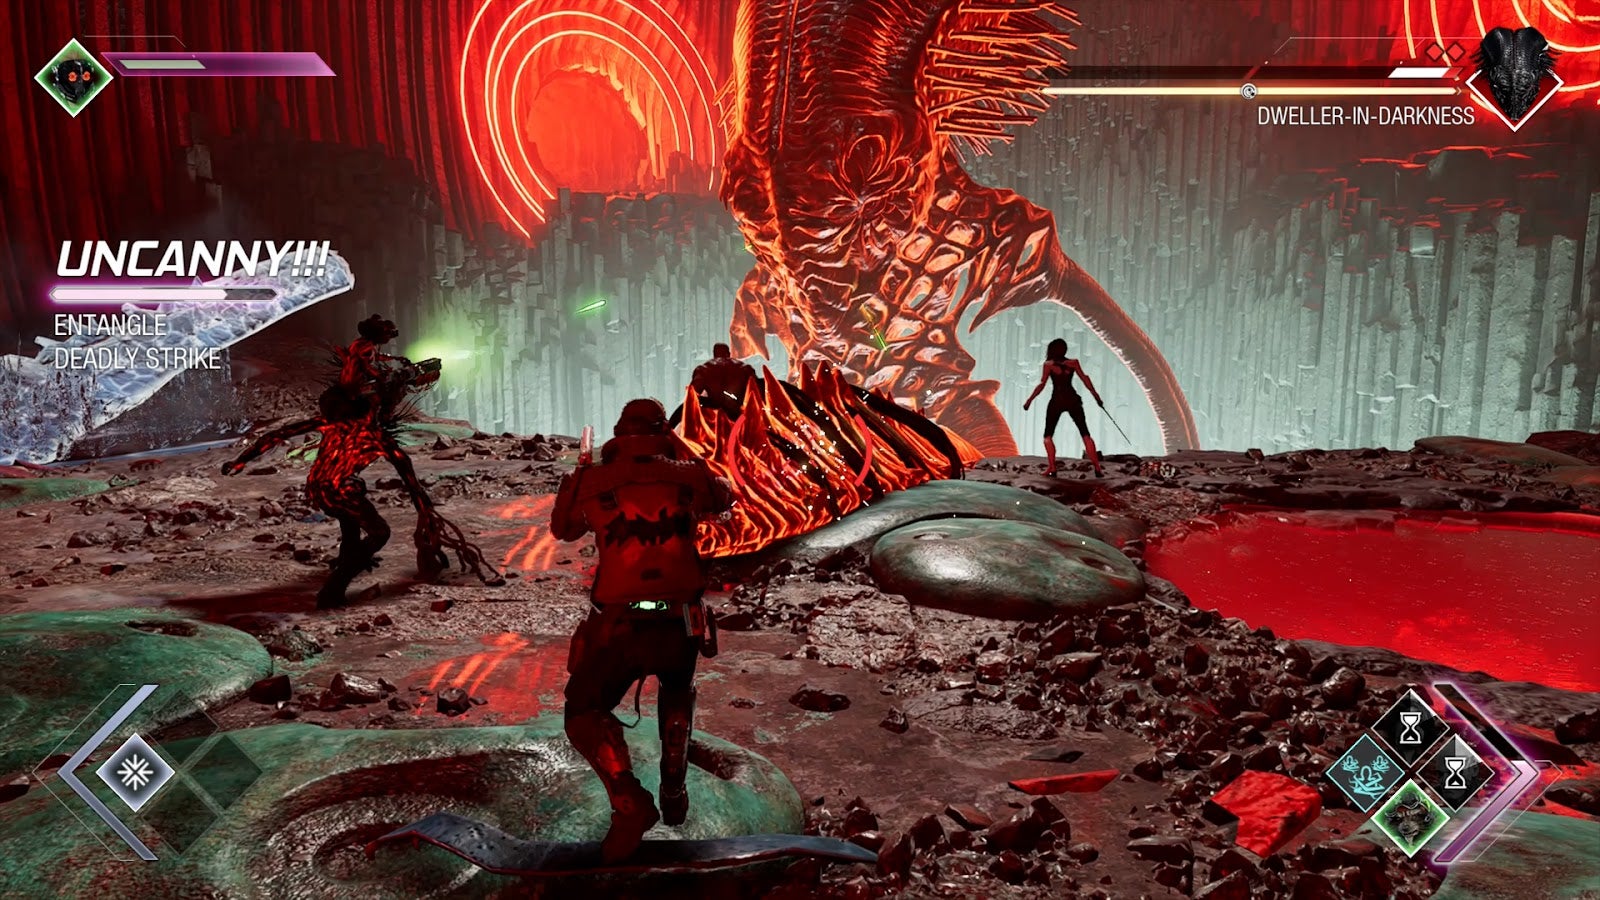 Sometimes you got to grab a giant space monster's tentacle and hold on tight.  (Screenshot: Square Enix / Kotaku)